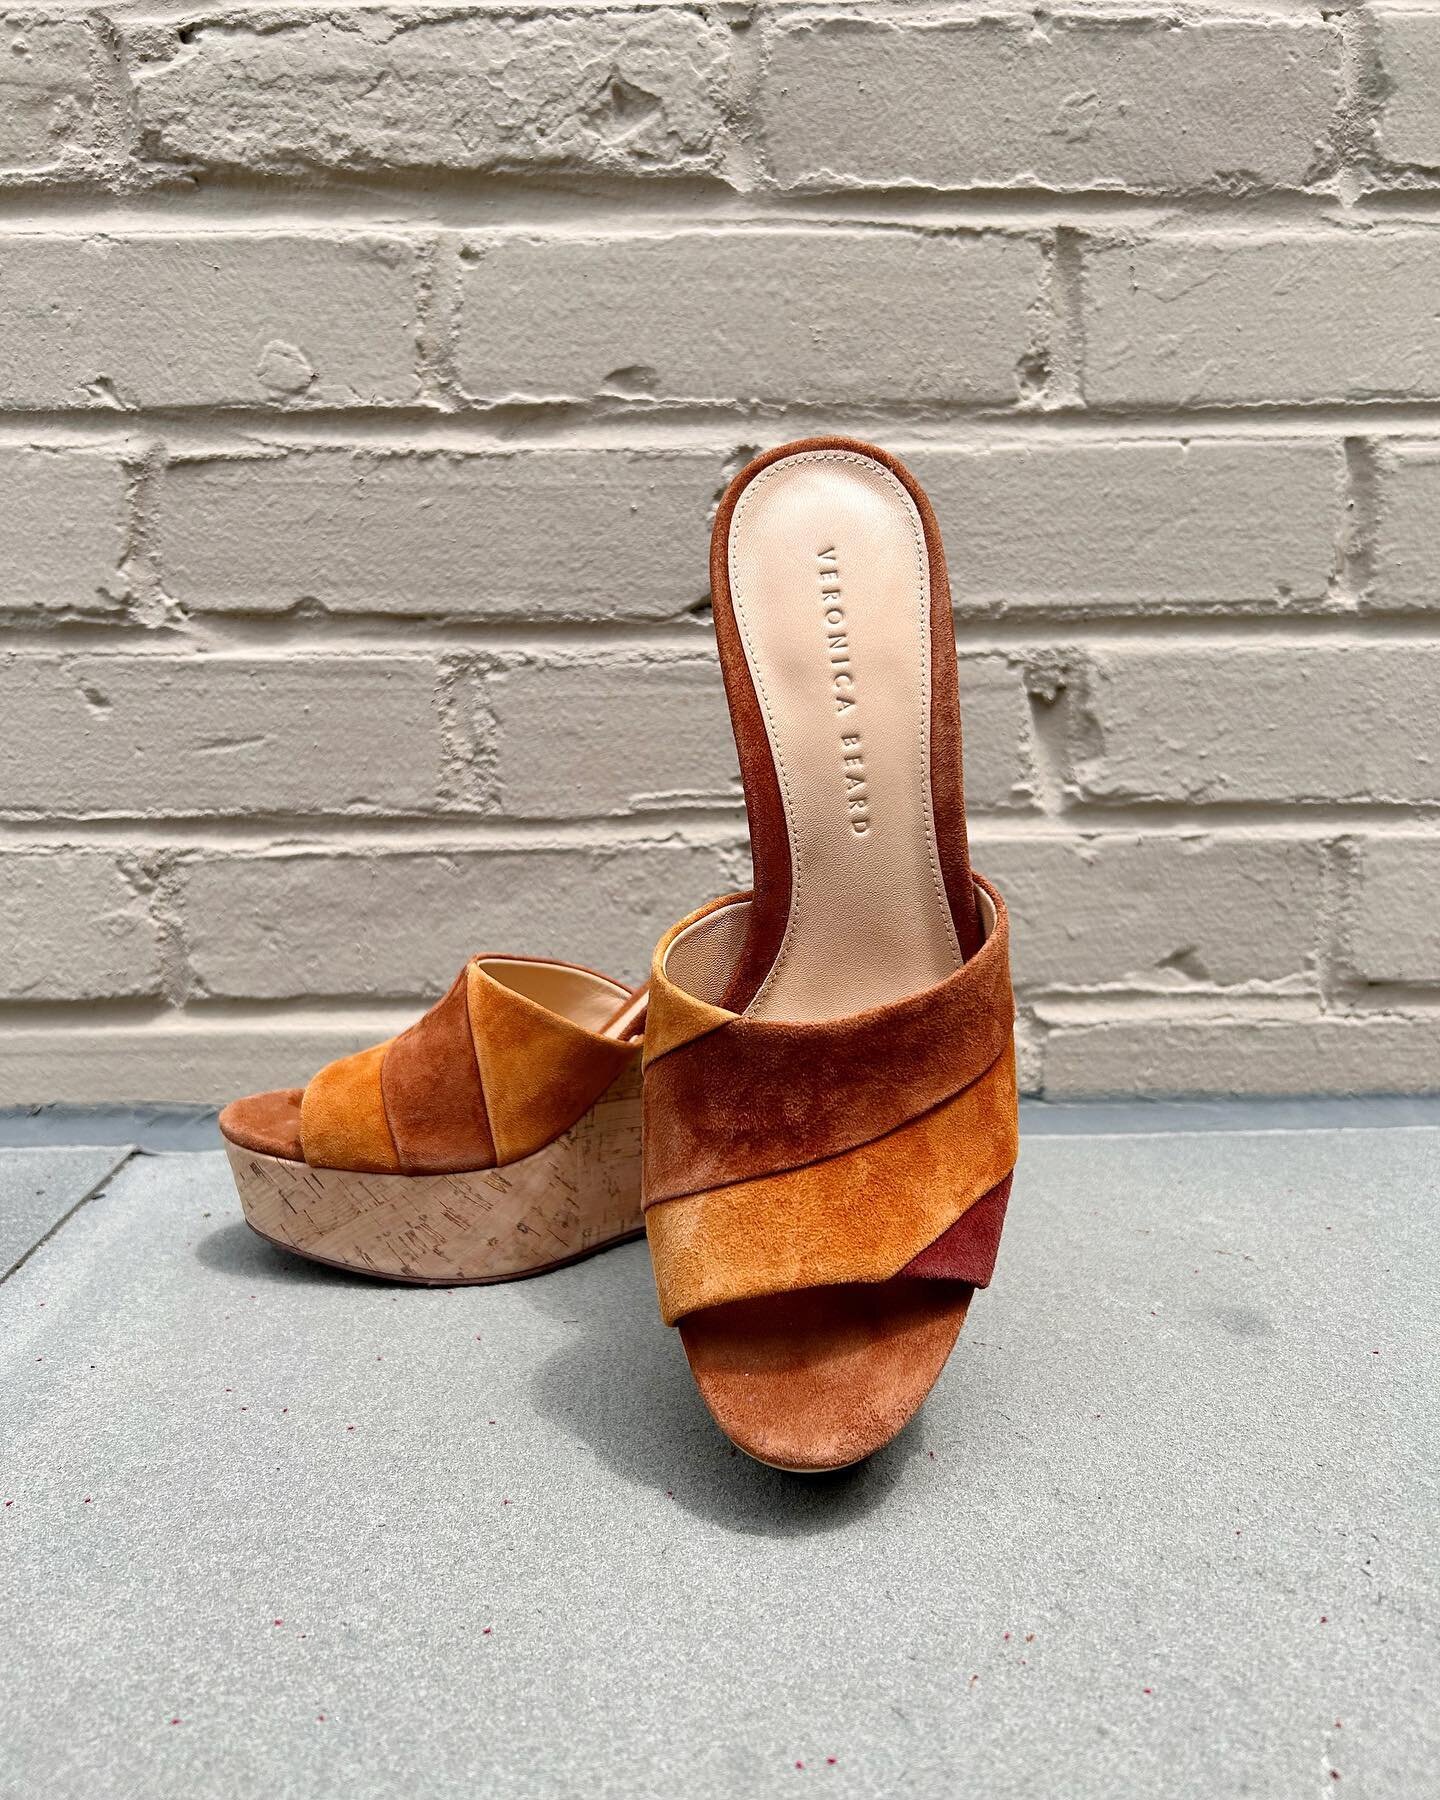 Veronica Beard ladies!!🤭 Stop by and check out these gorgeous heels💕 

Available for $90.95
Size: 7.5

For inquiries call or email us!
Phone: 267.331.6725
Email: chestnuthill@greenestreet.com
.
.
.
.
#greenestreetchestnuthill #greenestreet #prada #